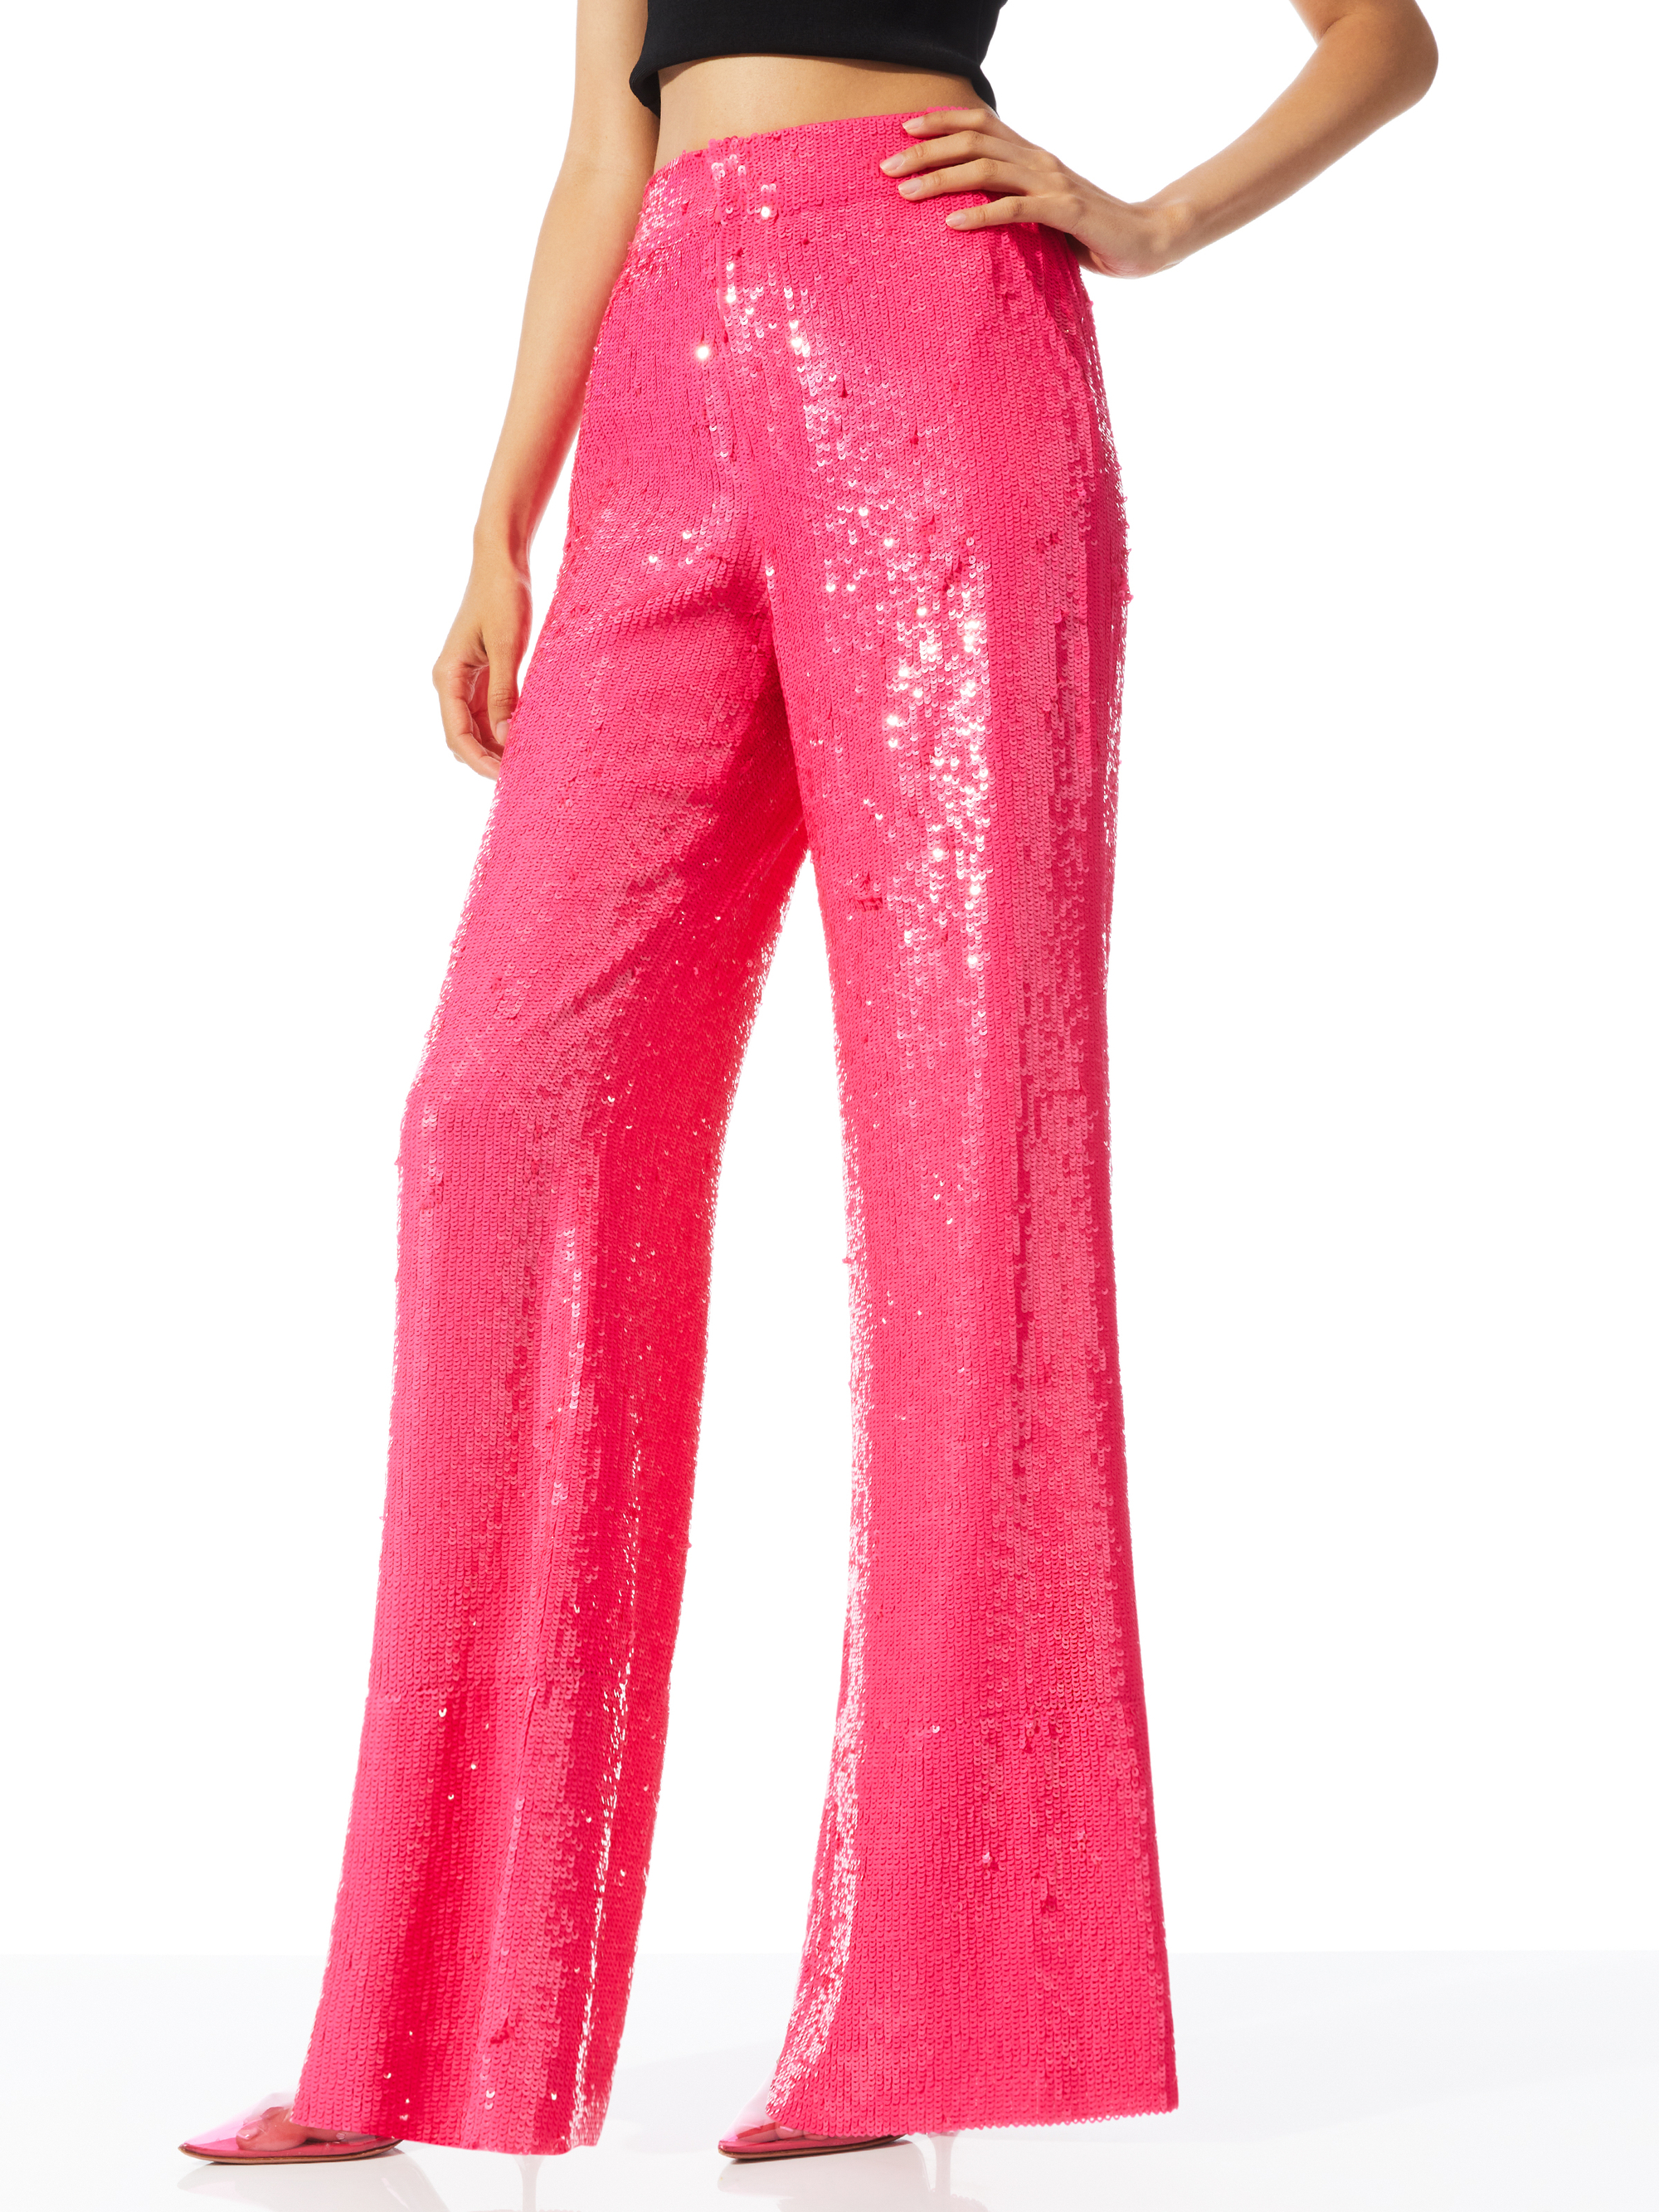 DYLAN HIGH WAISTED SEQUIN PANT - WILD PINK - Alice And Olivia